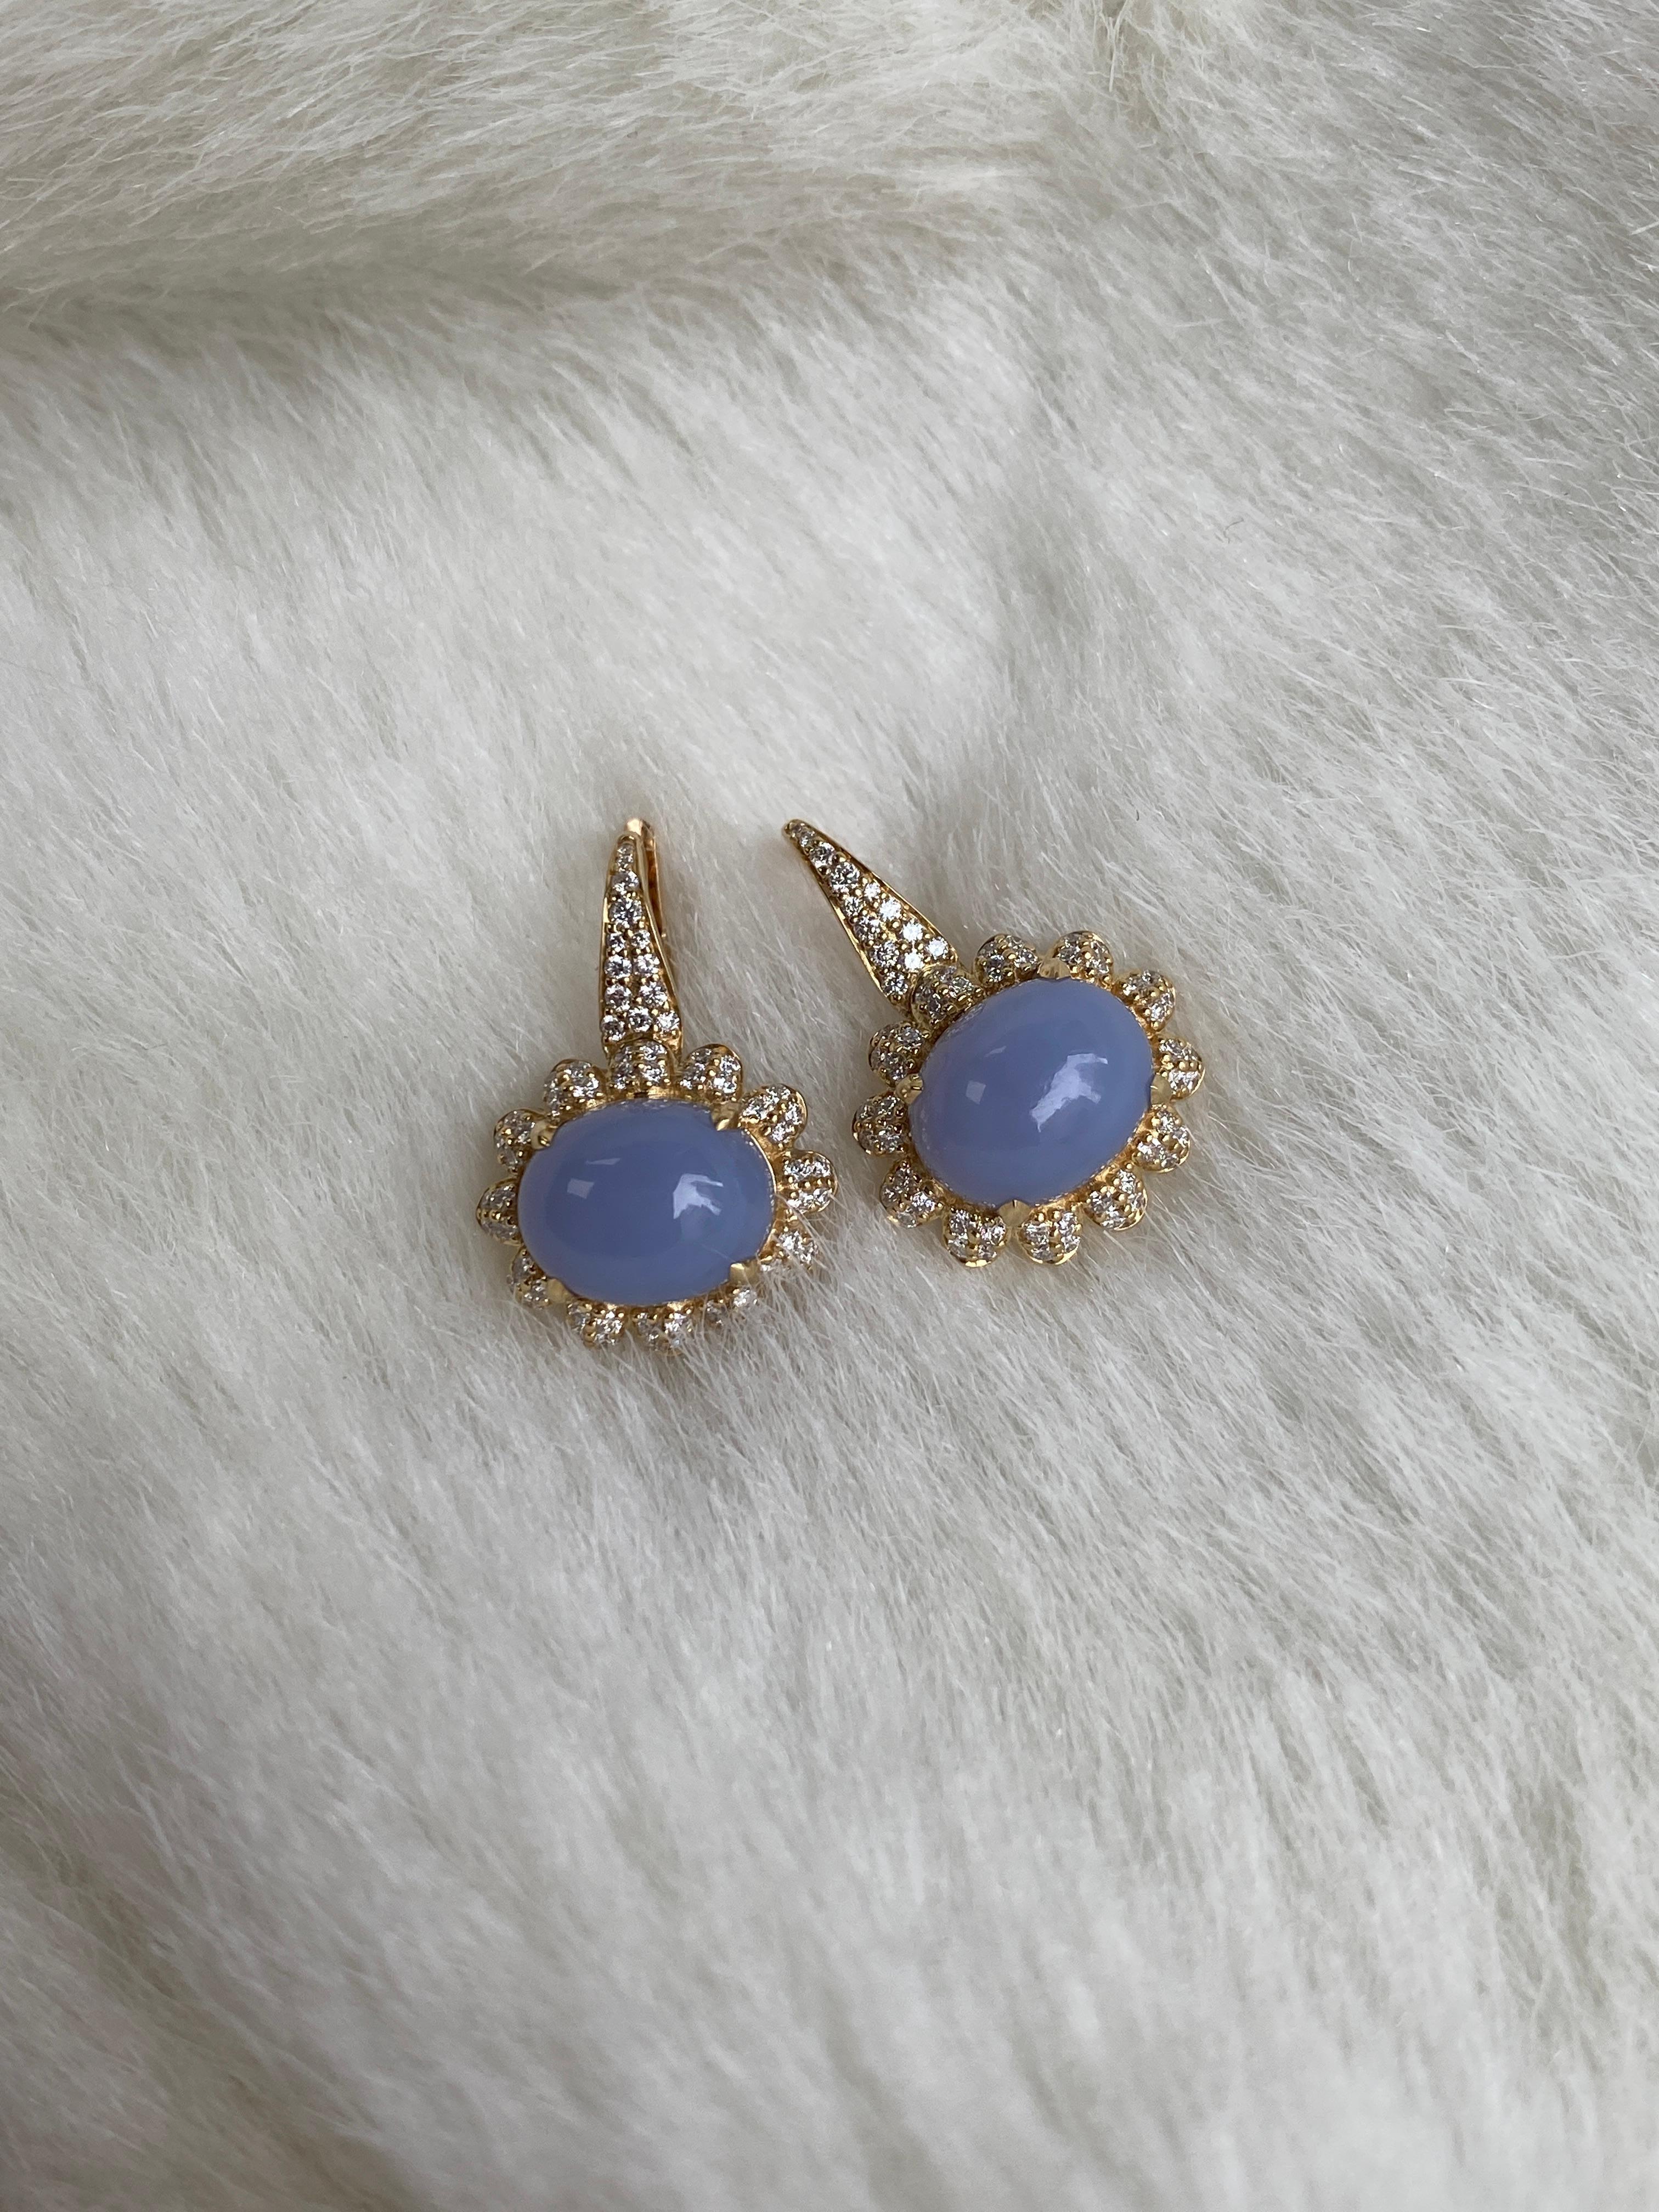 Oval Cut Goshwara Oval Cabochon Blue Chalcedony and Diamond Earrings For Sale